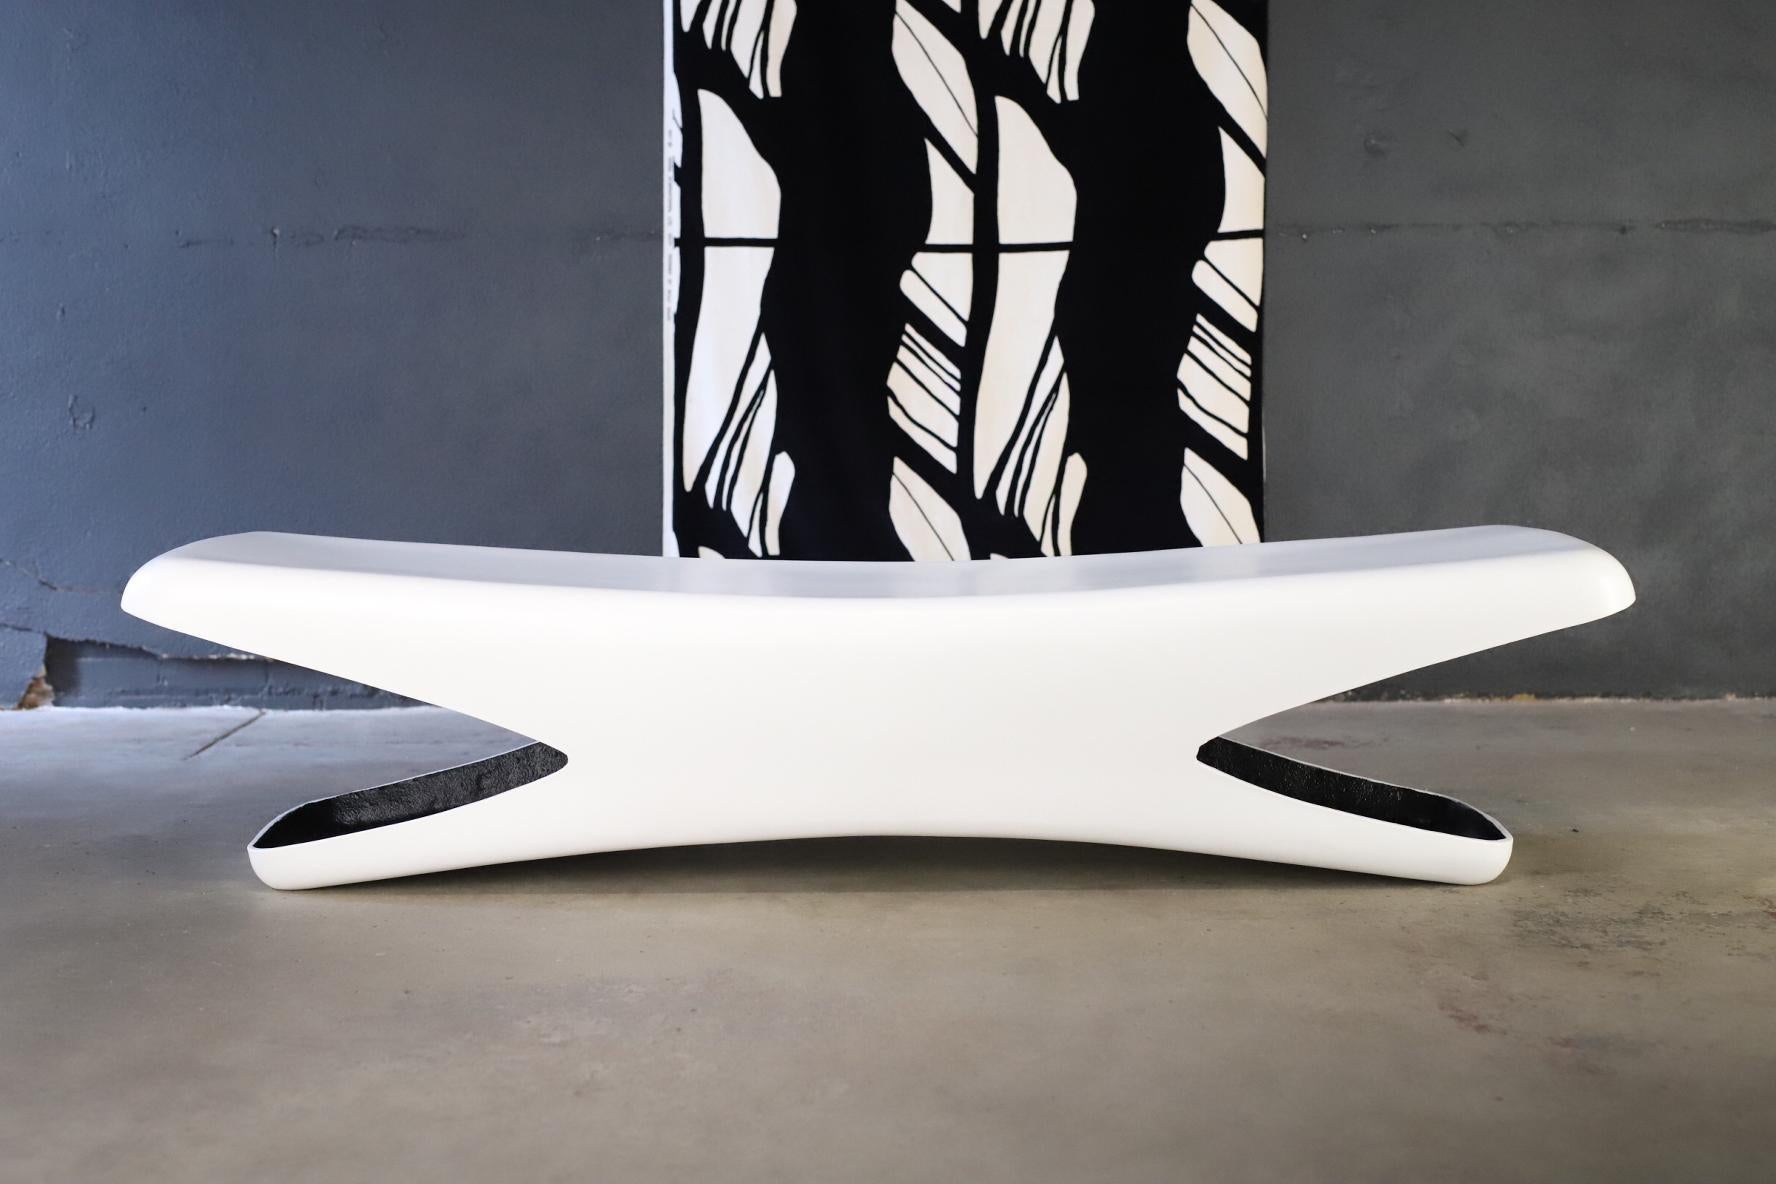 Wonderful space age indoor or outdoor fiberglass bench designed by Douglas Deeds for Sintoform Architectural Fiberglass. Bench has been professionally restored and painted in a flat white paint for outdoor use. Photographed with Herman Miller Eames